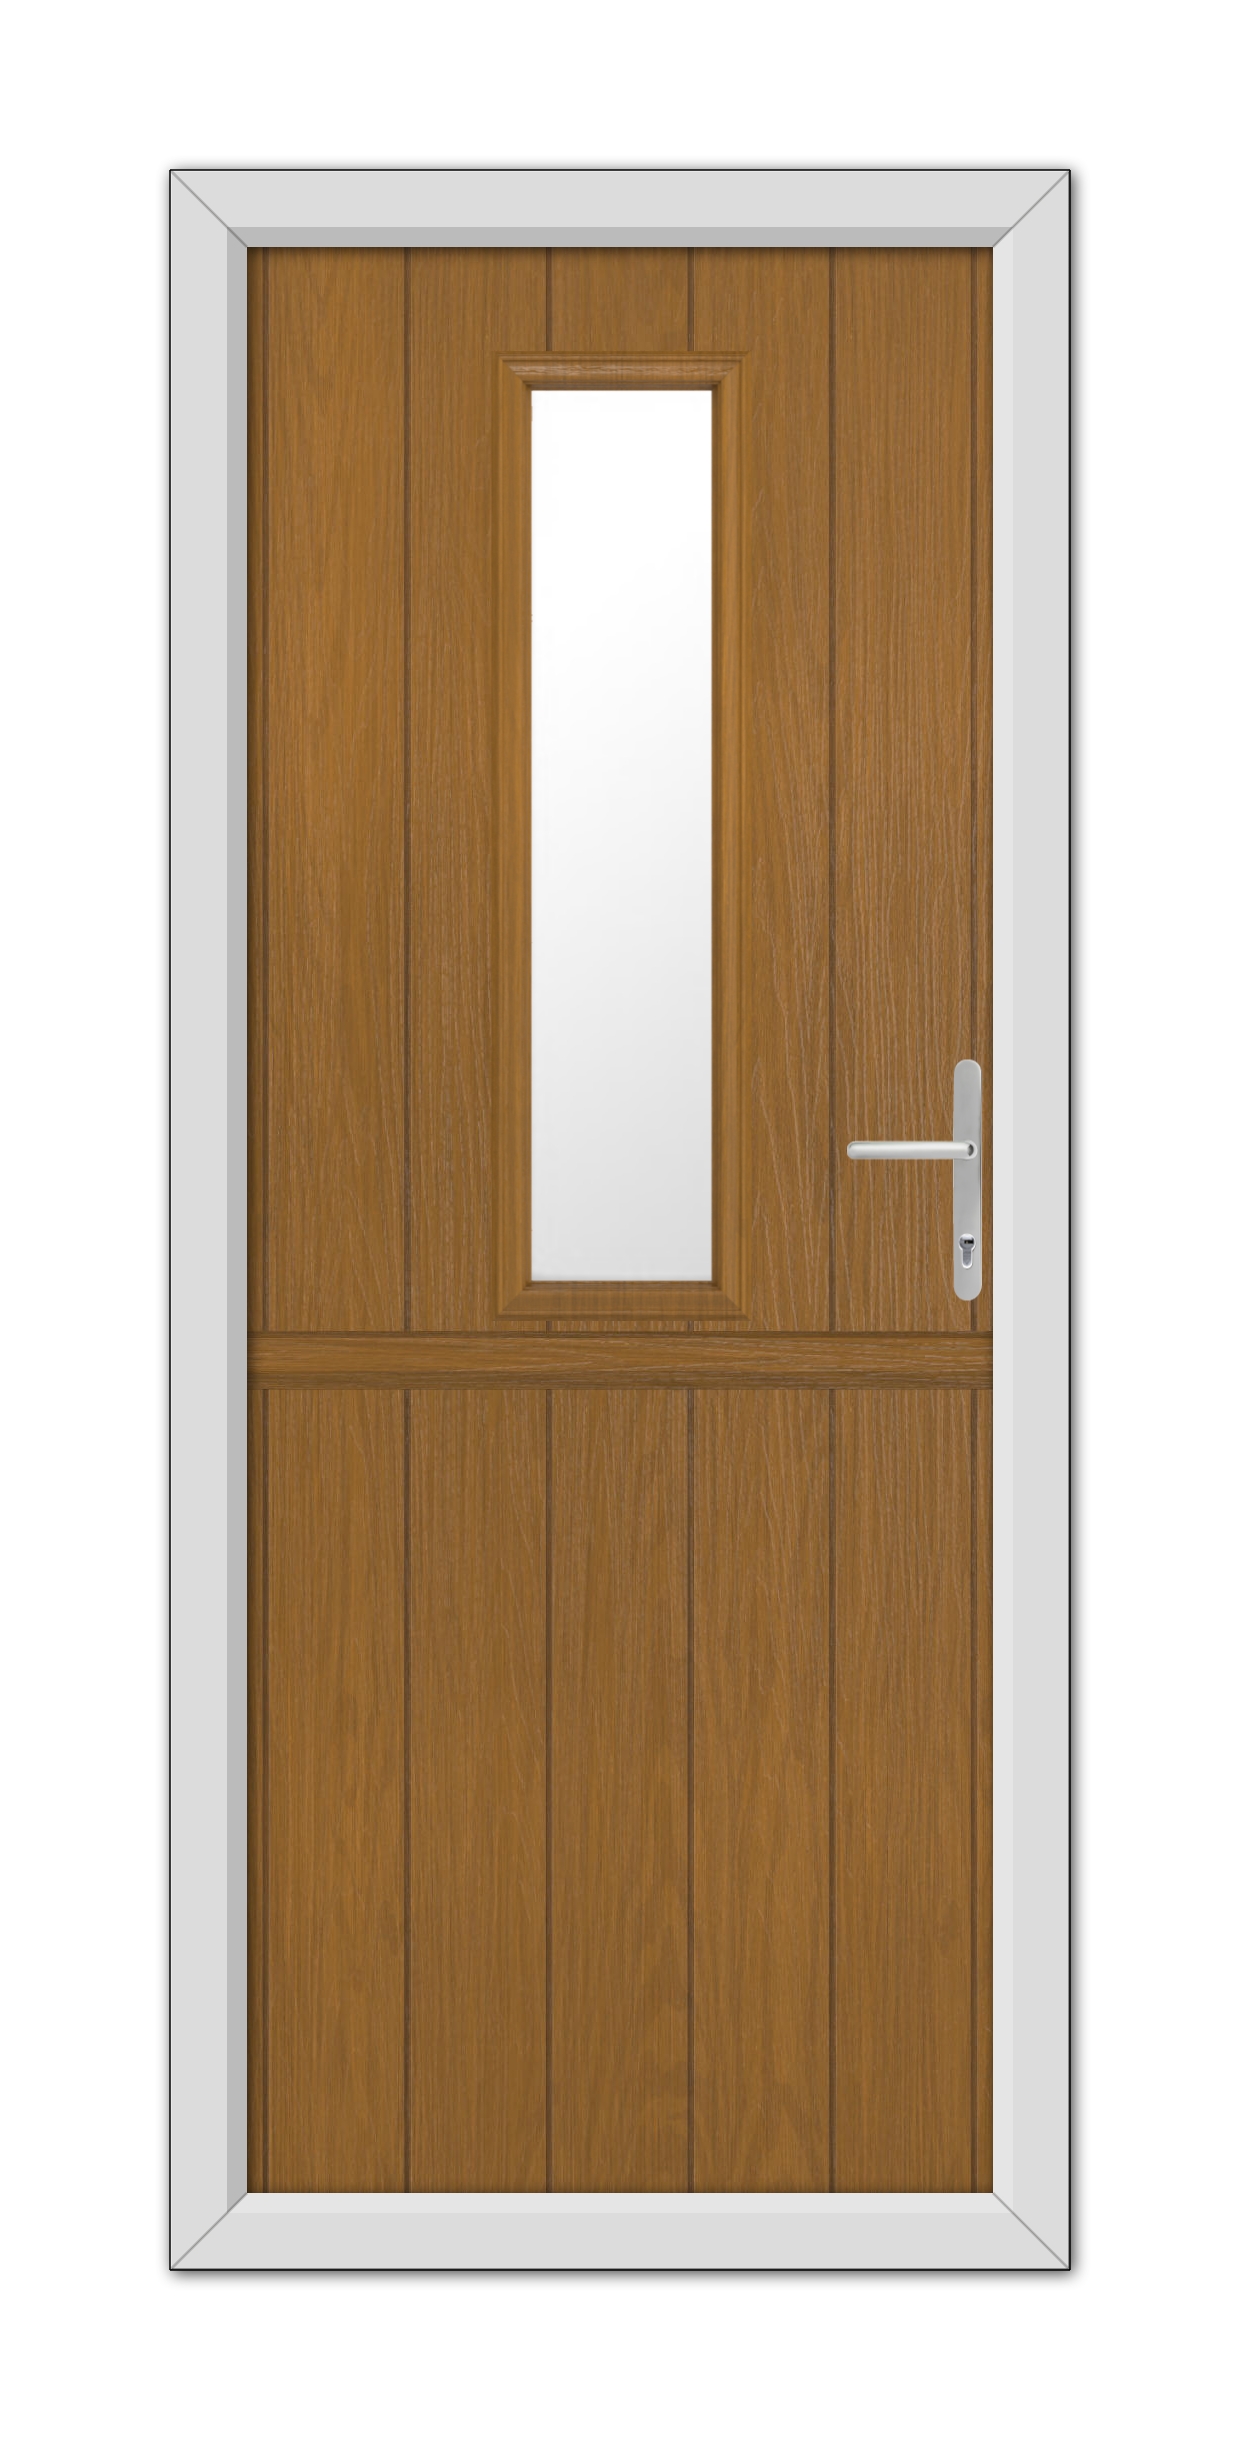 A Oak Mowbray Stable Composite Door 48mm Timber Core with a vertical, rectangular glass panel, equipped with a modern handle, set within a white frame.